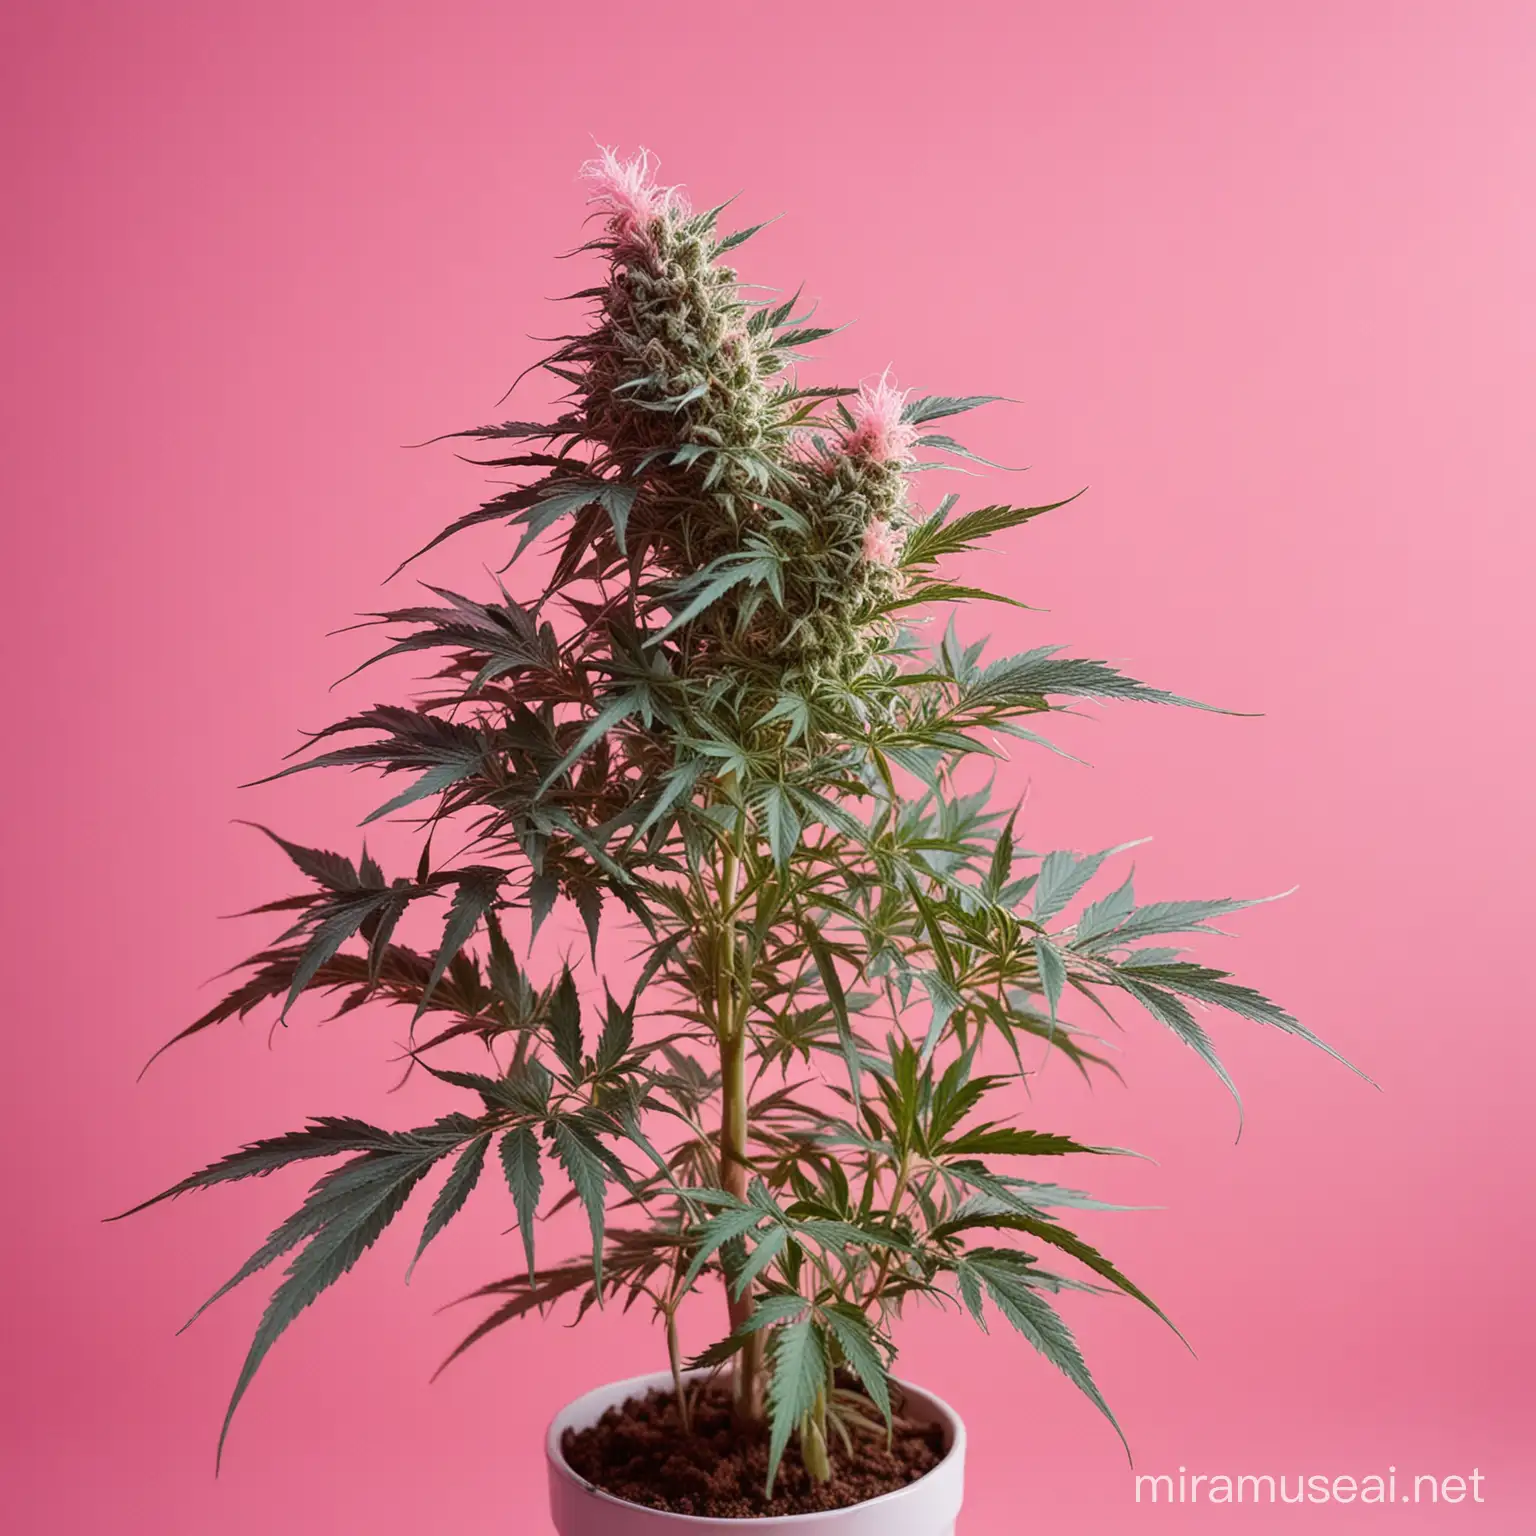 cannabis plant. prominently featuring hues of bubblegum pink in the background composition.